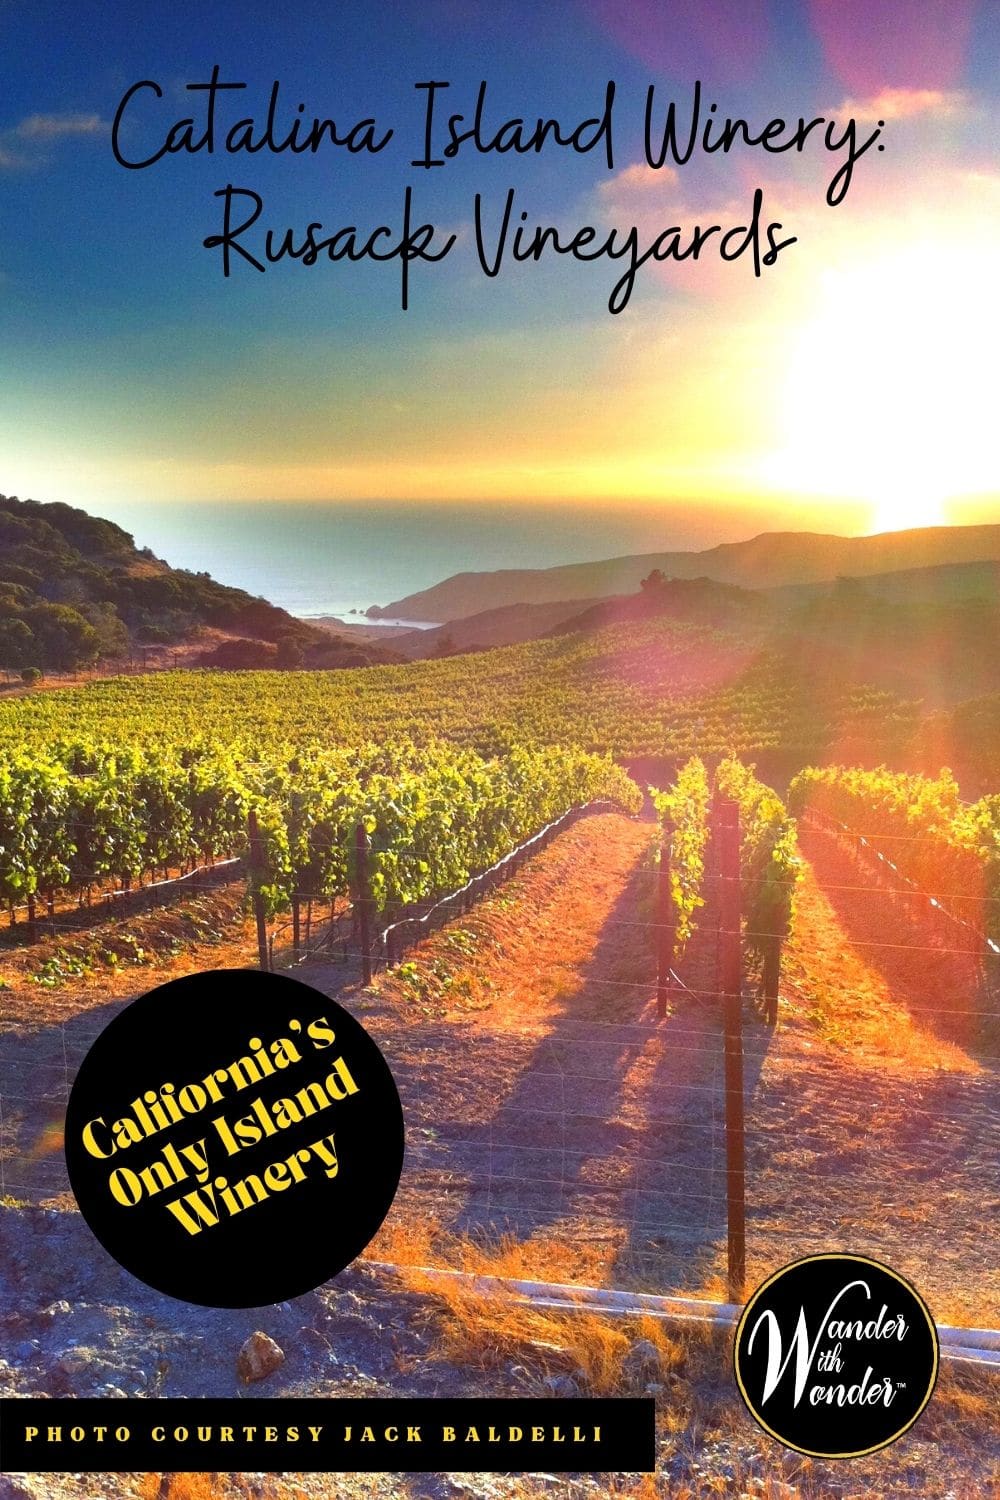 Rusack Vineyards is a Catalina Island winery with roots going back to the Wrigley family. Here is the best of exploring Catalina wines. Plus, some of our favorite things to do while you're visiting California's Catalina Island.